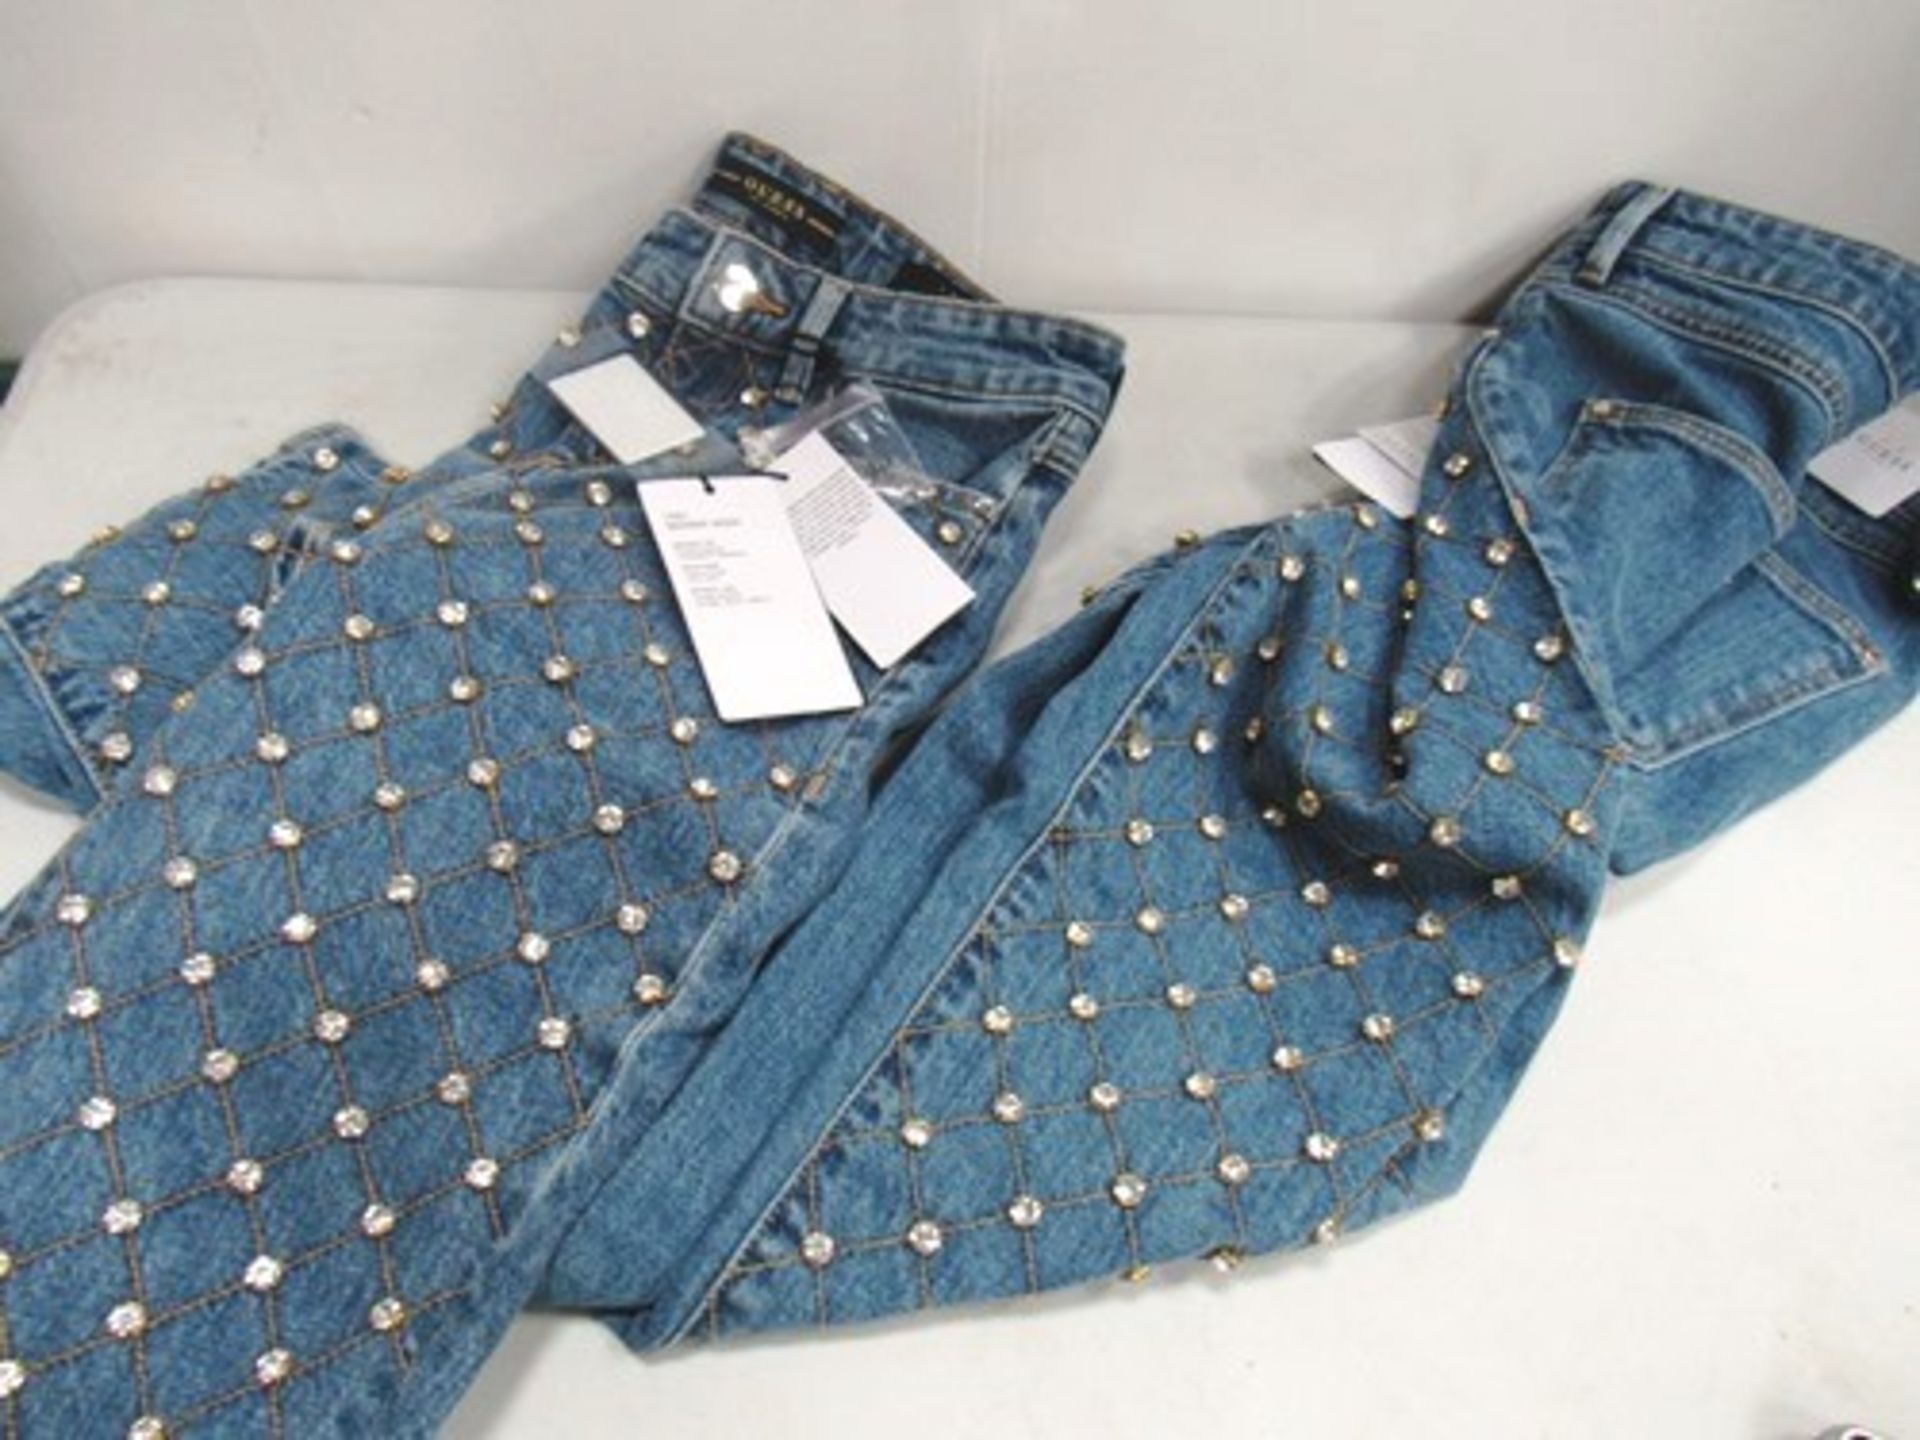 2 x pairs Guess skinny high rise jeans, crystal studded, 1 x pair size 24W and 1 x pairs size 27W,